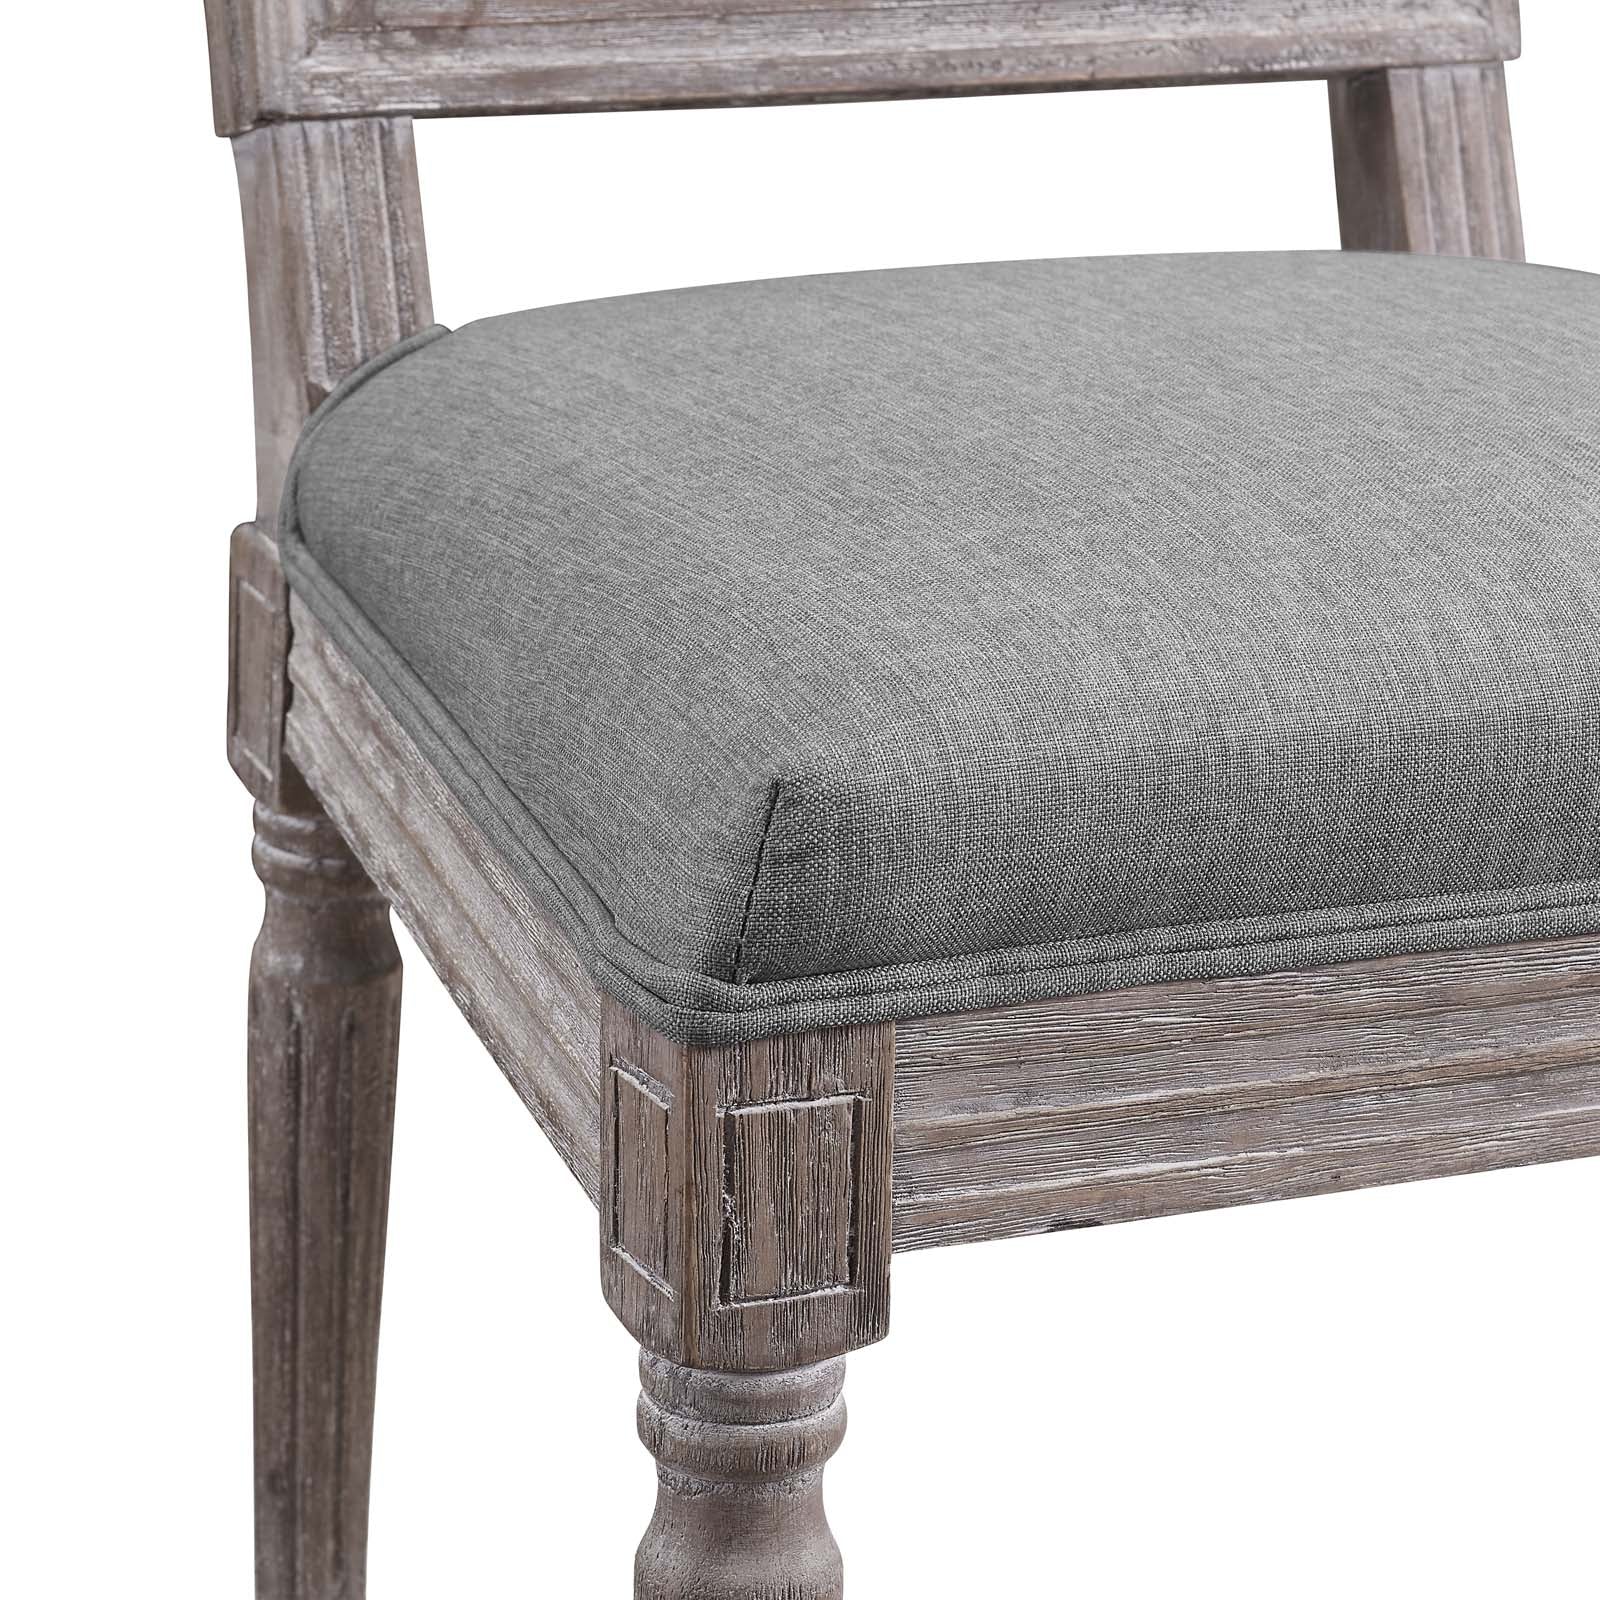 Court Vintage French Upholstered Fabric Dining Side Chair - East Shore Modern Home Furnishings